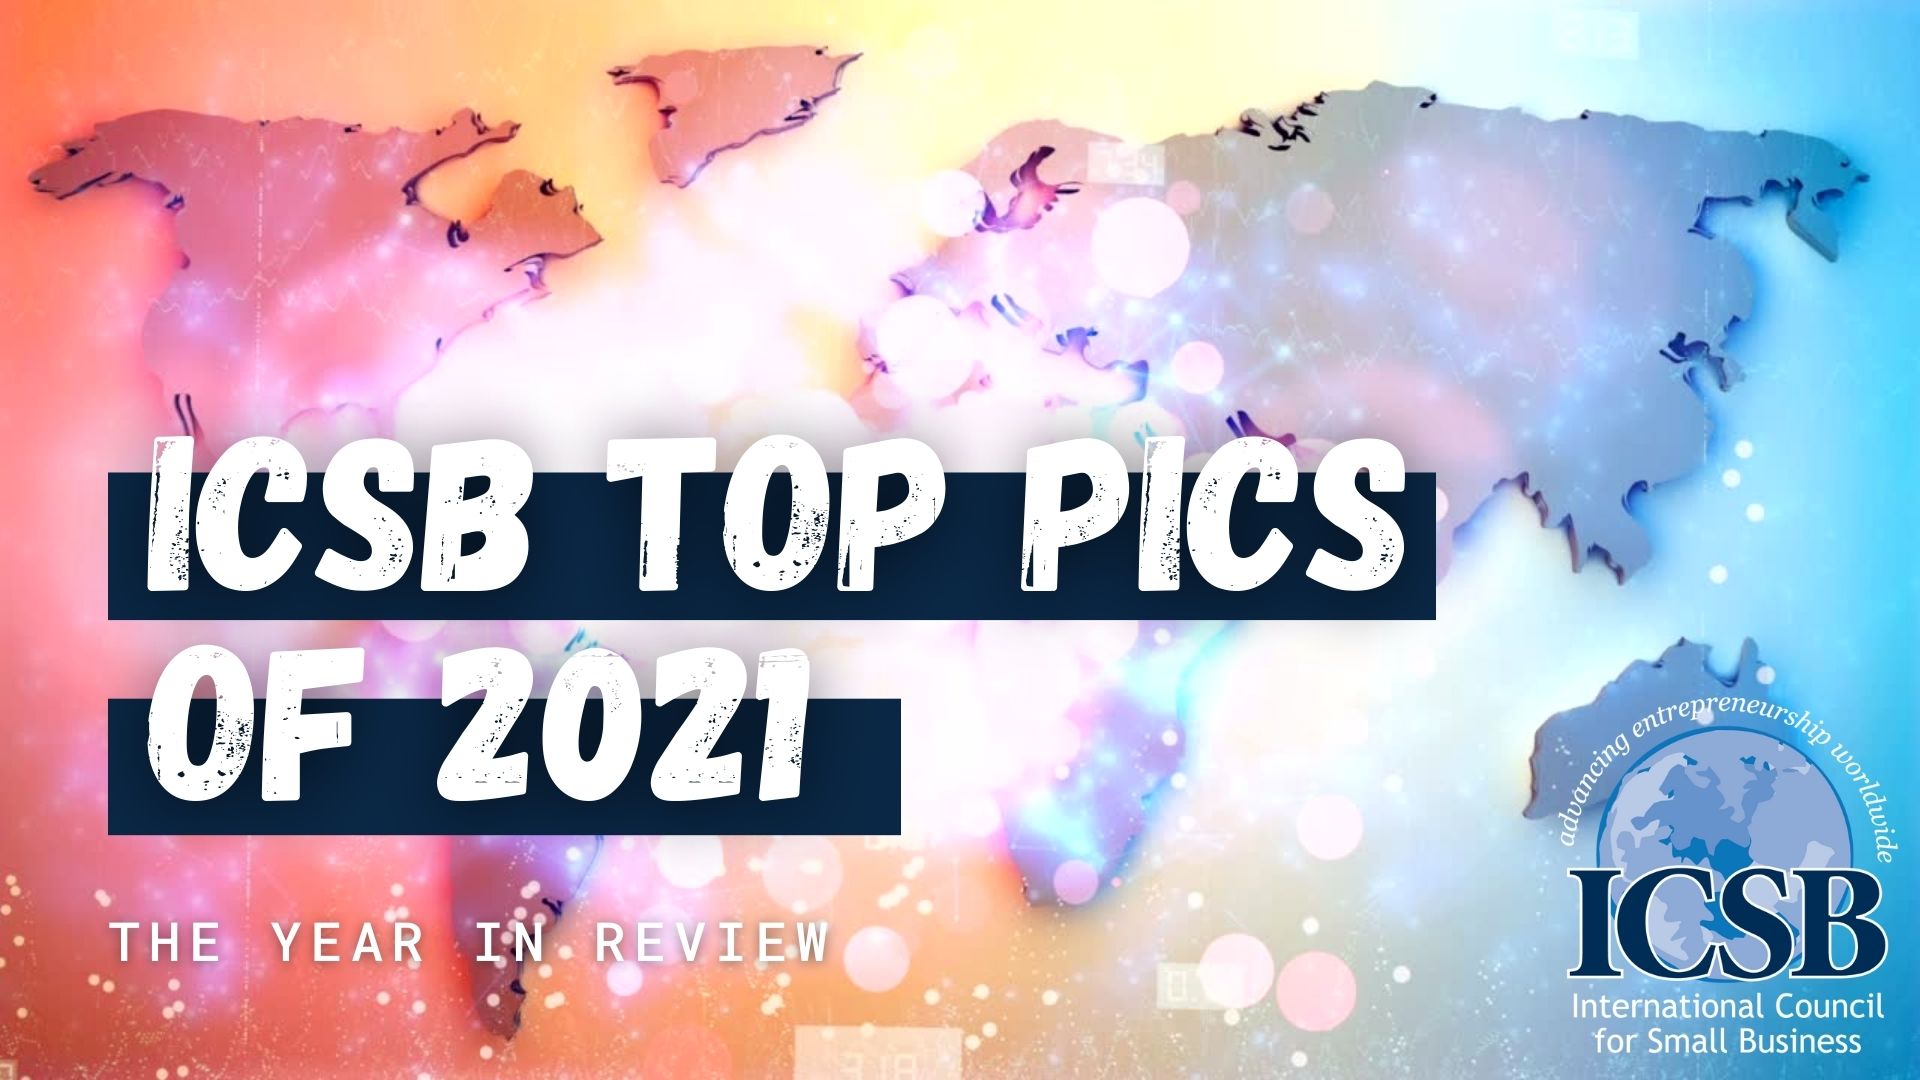 ICSB Top Photos of 2021 | ICSB | International Council for Small Business